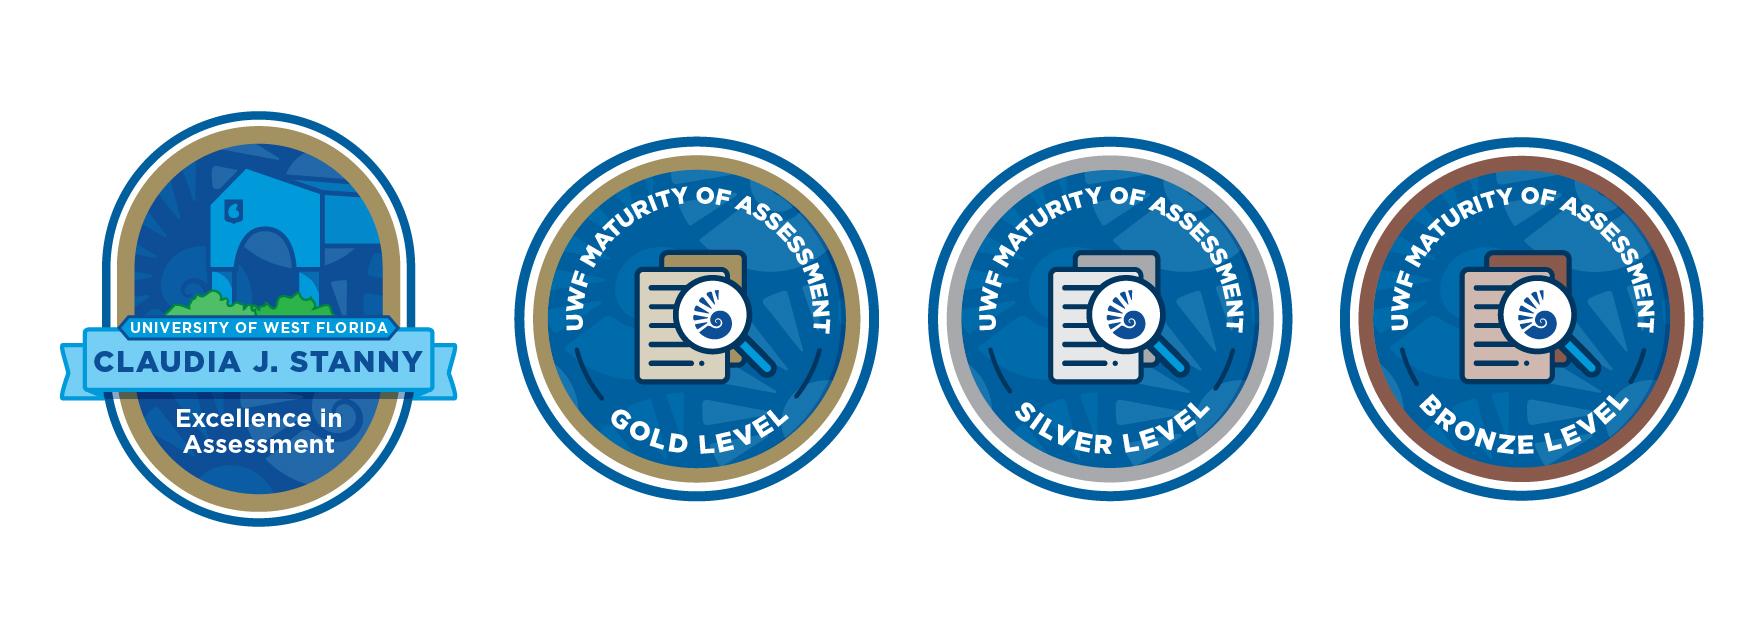 examples of the four available badges for departmental assessment